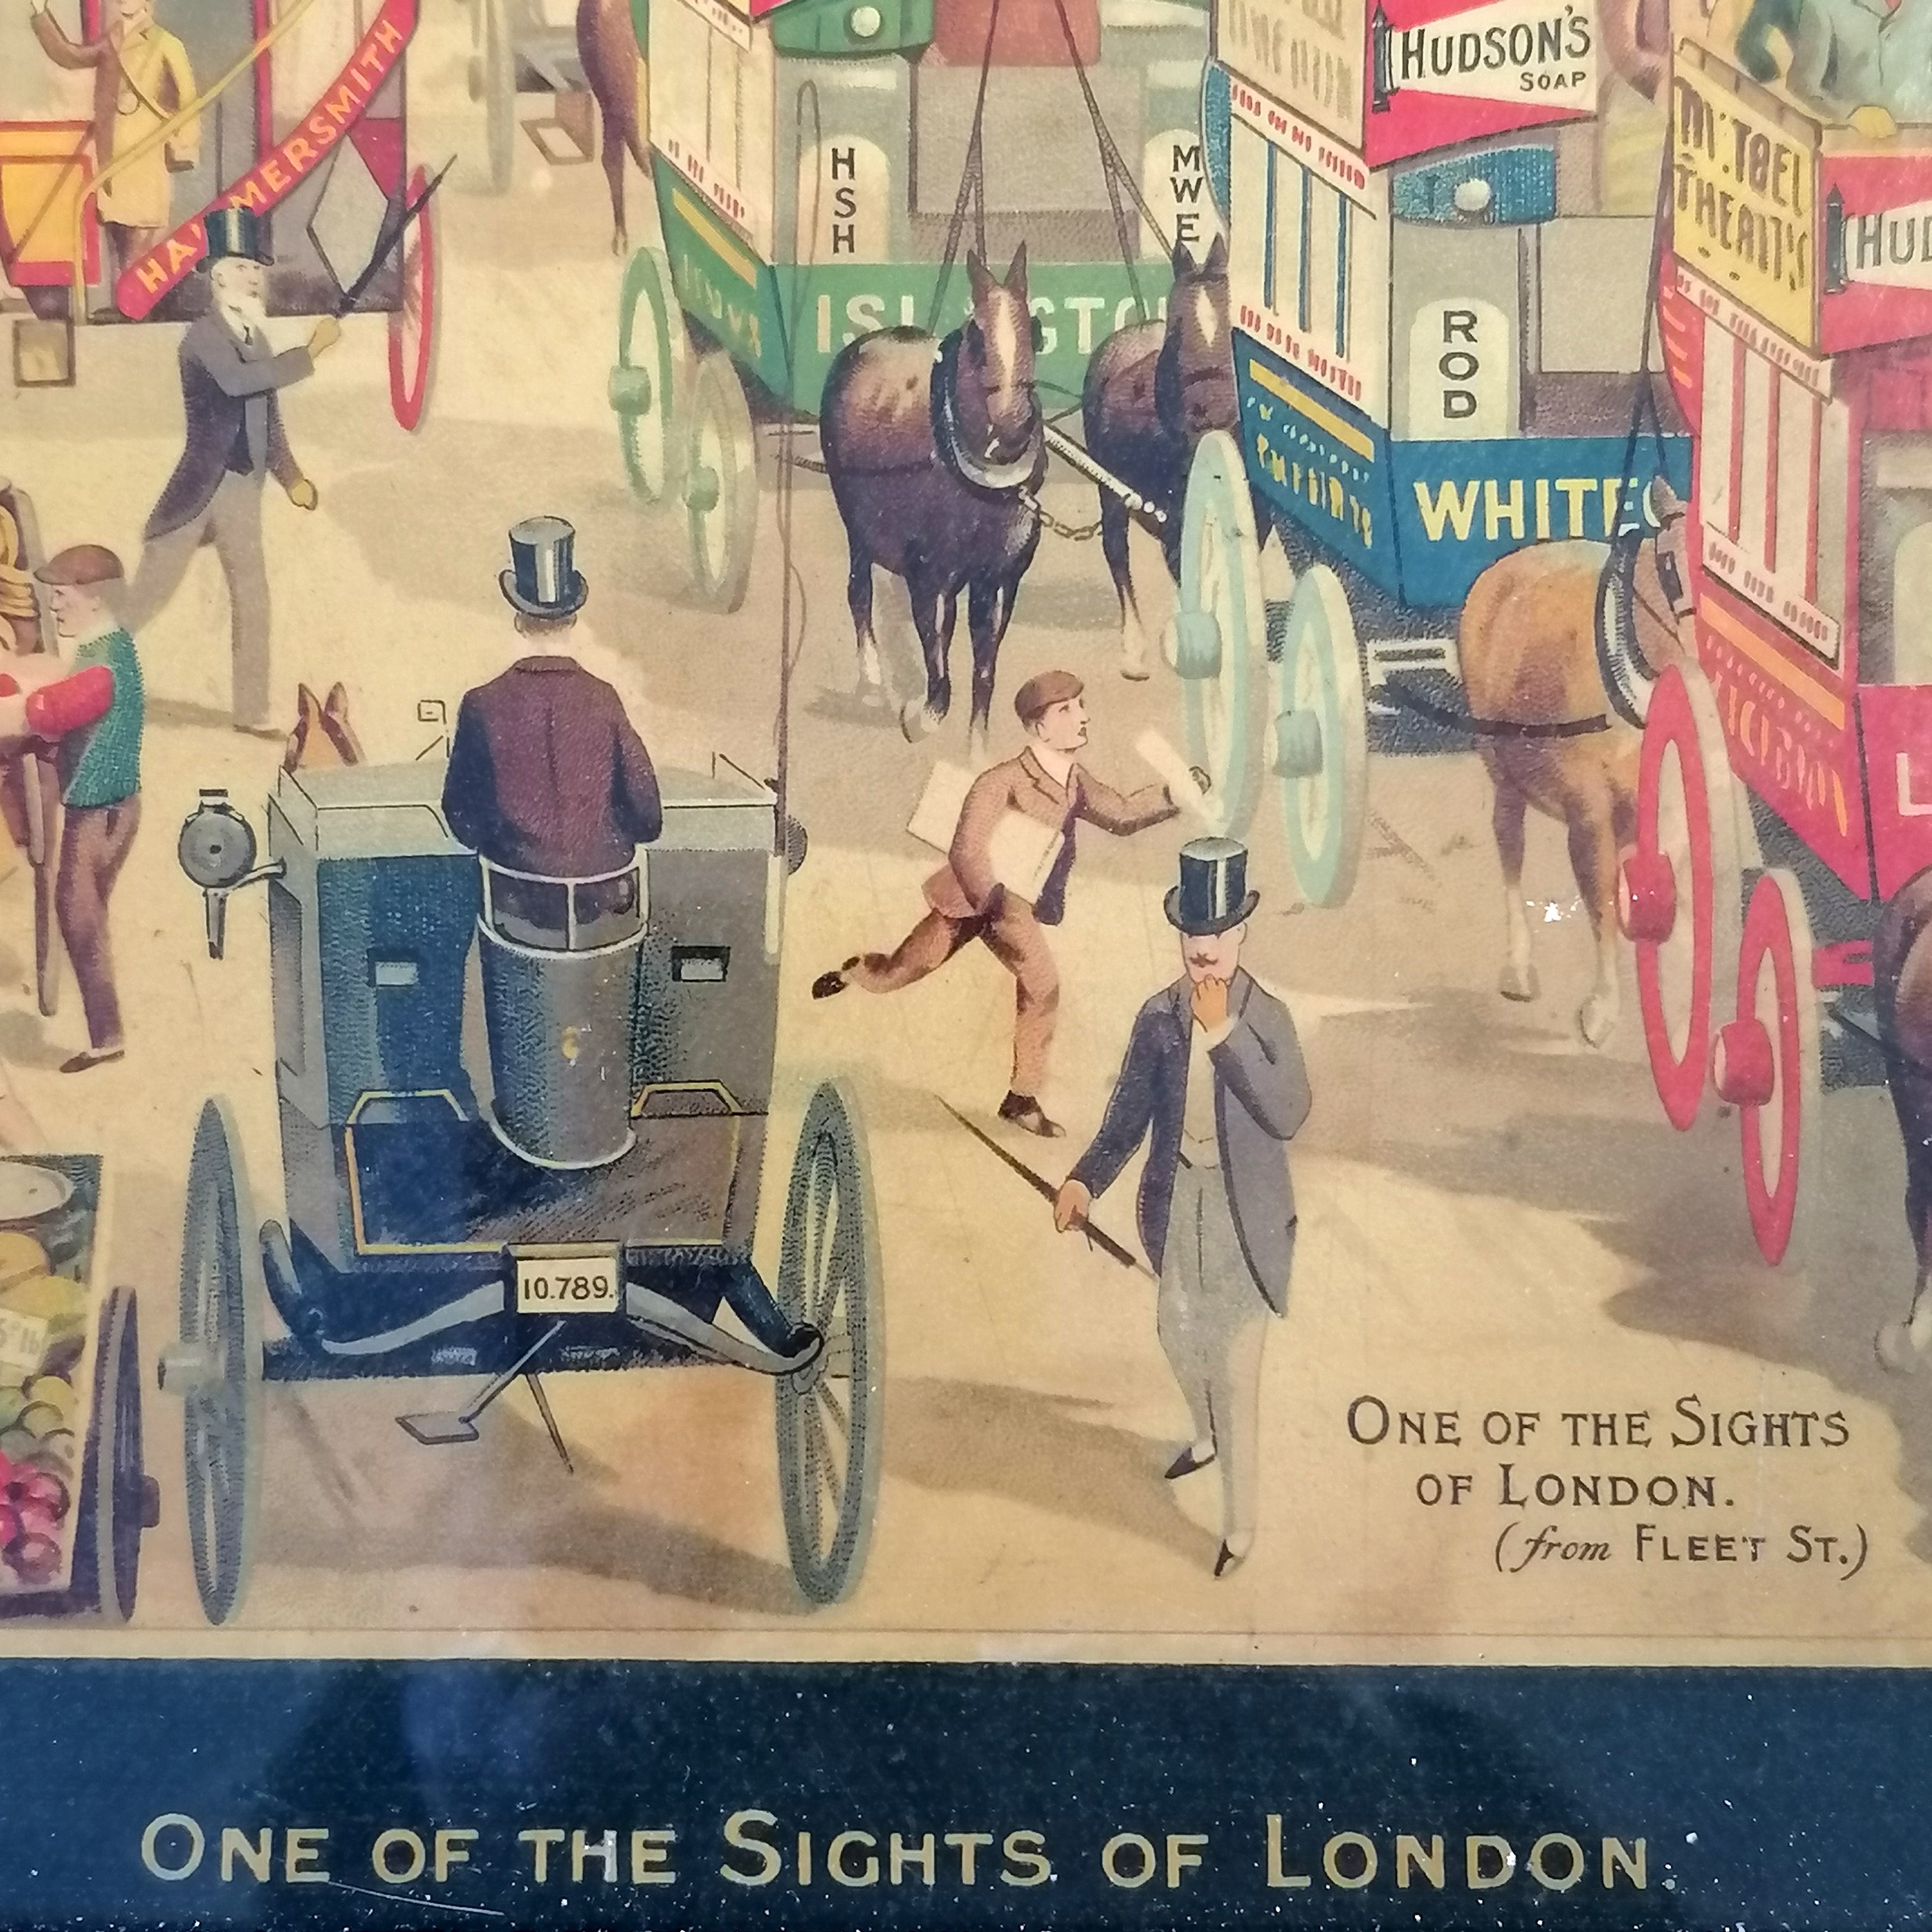 Hudson's soap framed antique advertising card 'One of the sights of London' by N&C - Image 2 of 2